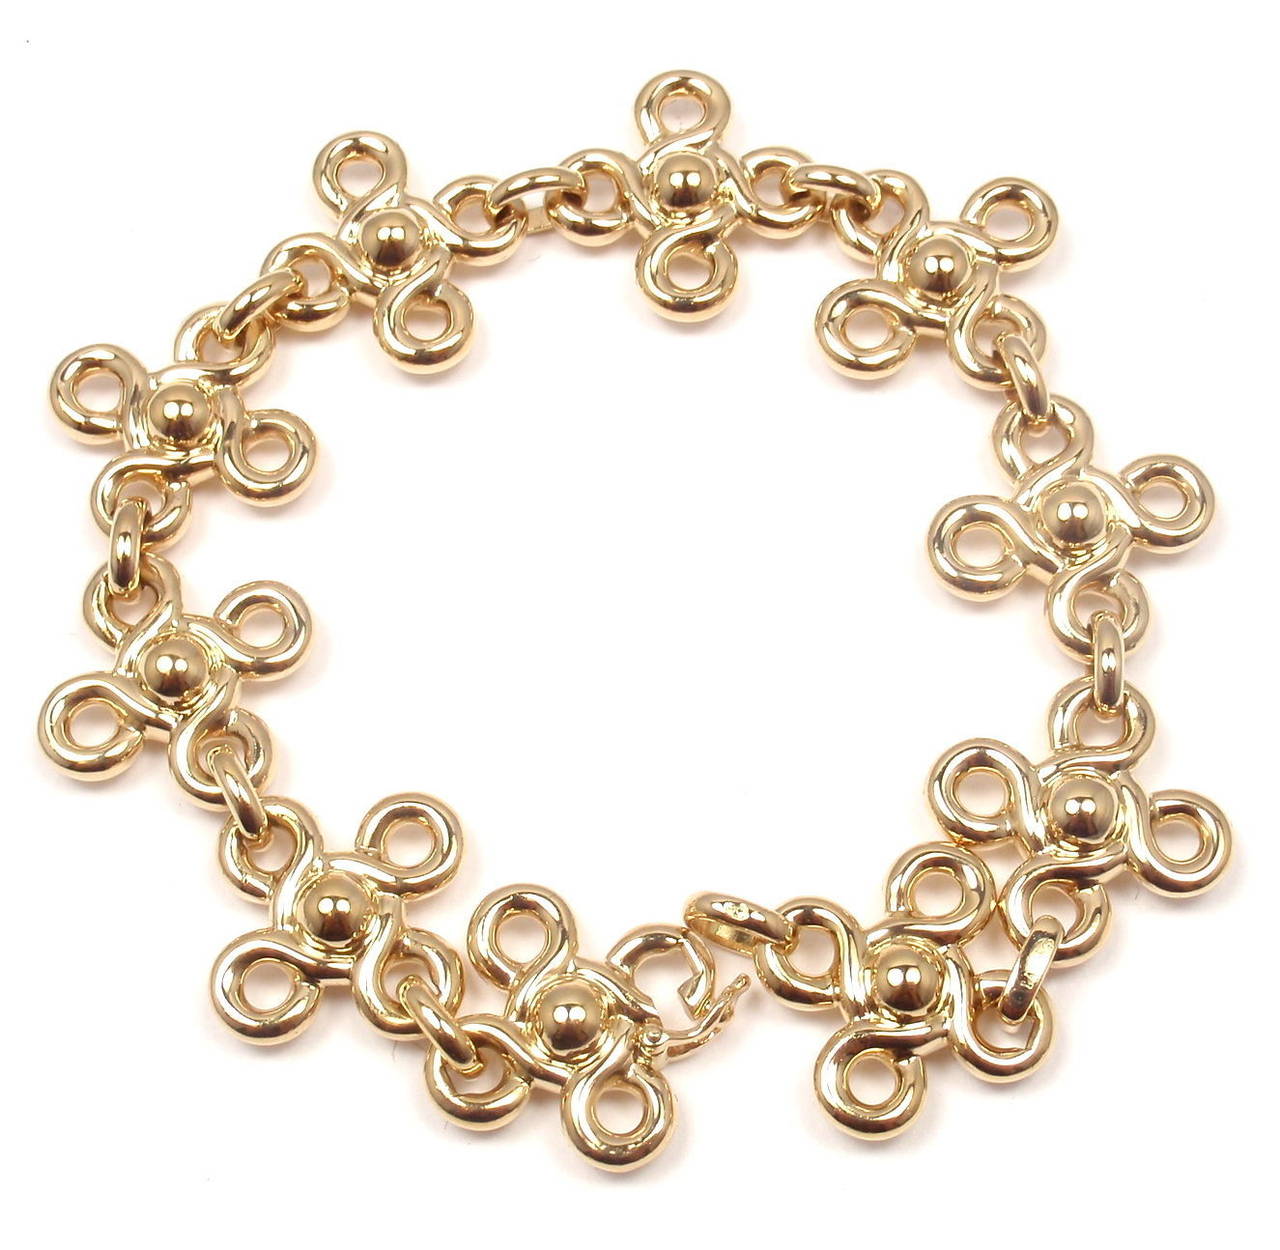 18k Yellow Gold Diamond Bracelet by Chanel. 
With 10 Diamonds, totaling 2.50ctw. VS Clarity H color. 
This bracelet comes with original Chanel box.

Details:
Width: 17mm
Weight: 38.6 grams
Stamped Hallmarks: Chanel 750 1A444
*Free Shipping